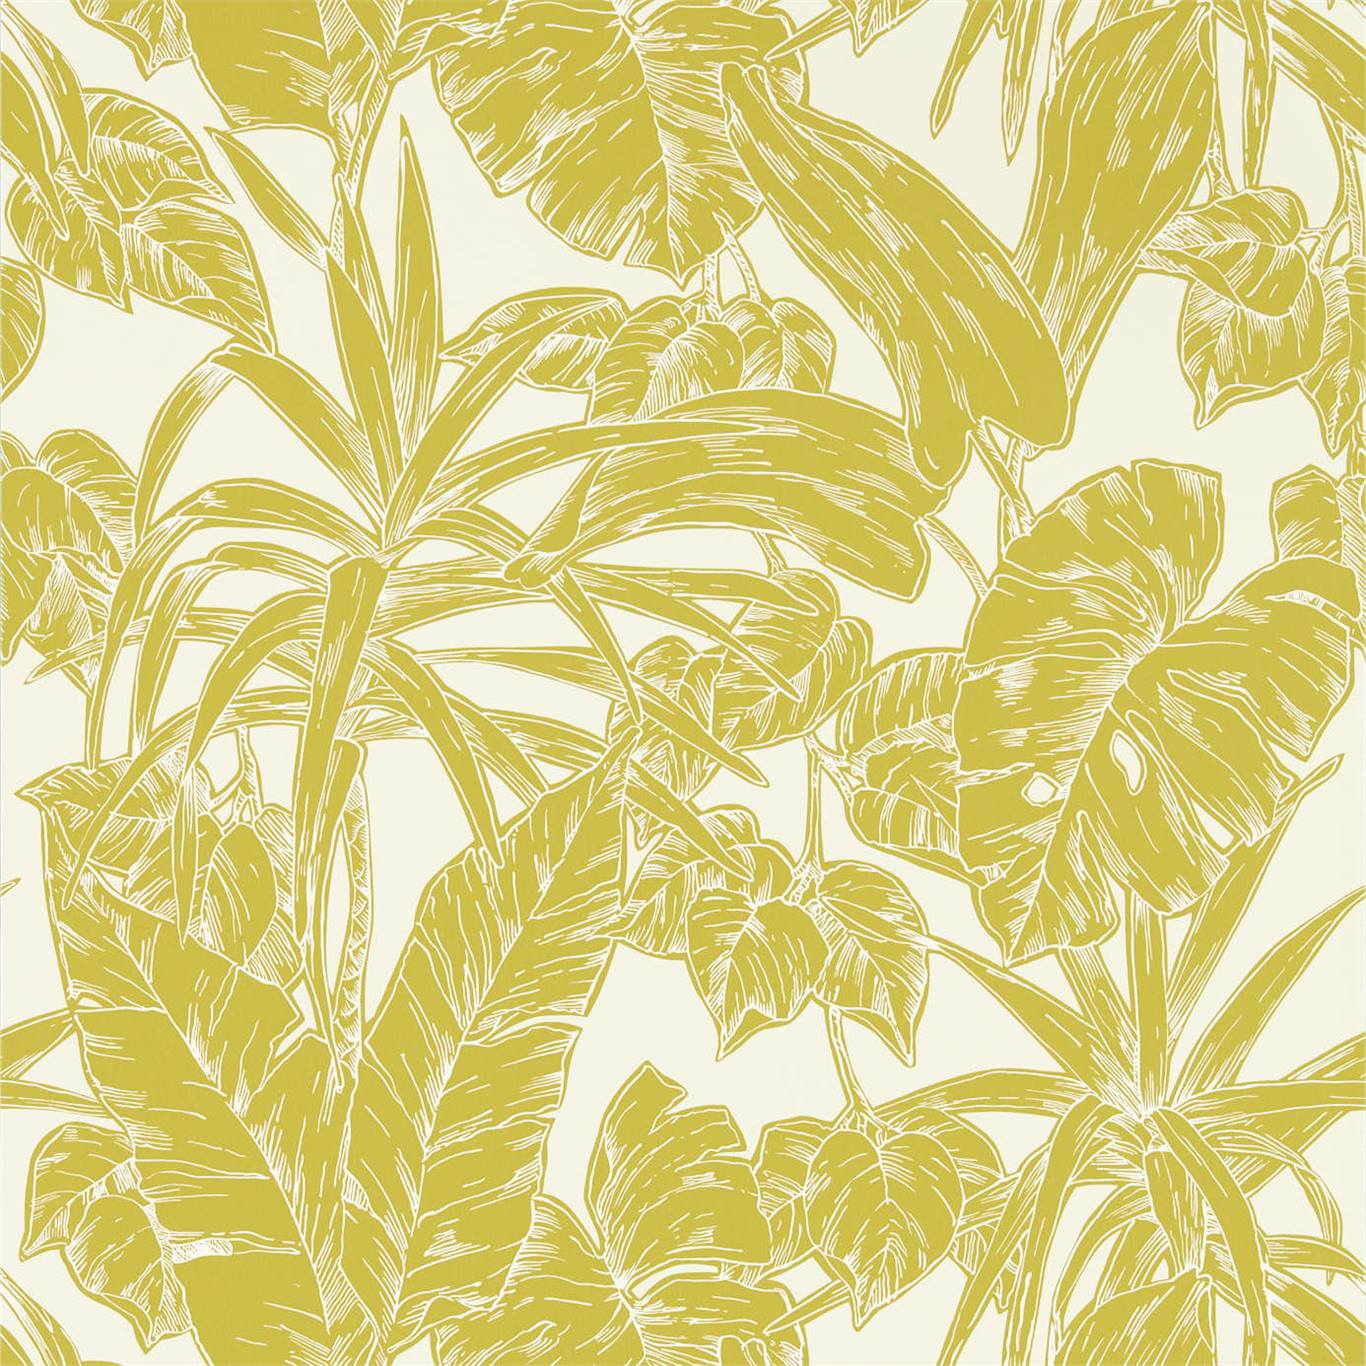 Parlour Palm, A Wallpaper By Scion, Part Of The Zanzibar - Scion Wallpapers , HD Wallpaper & Backgrounds